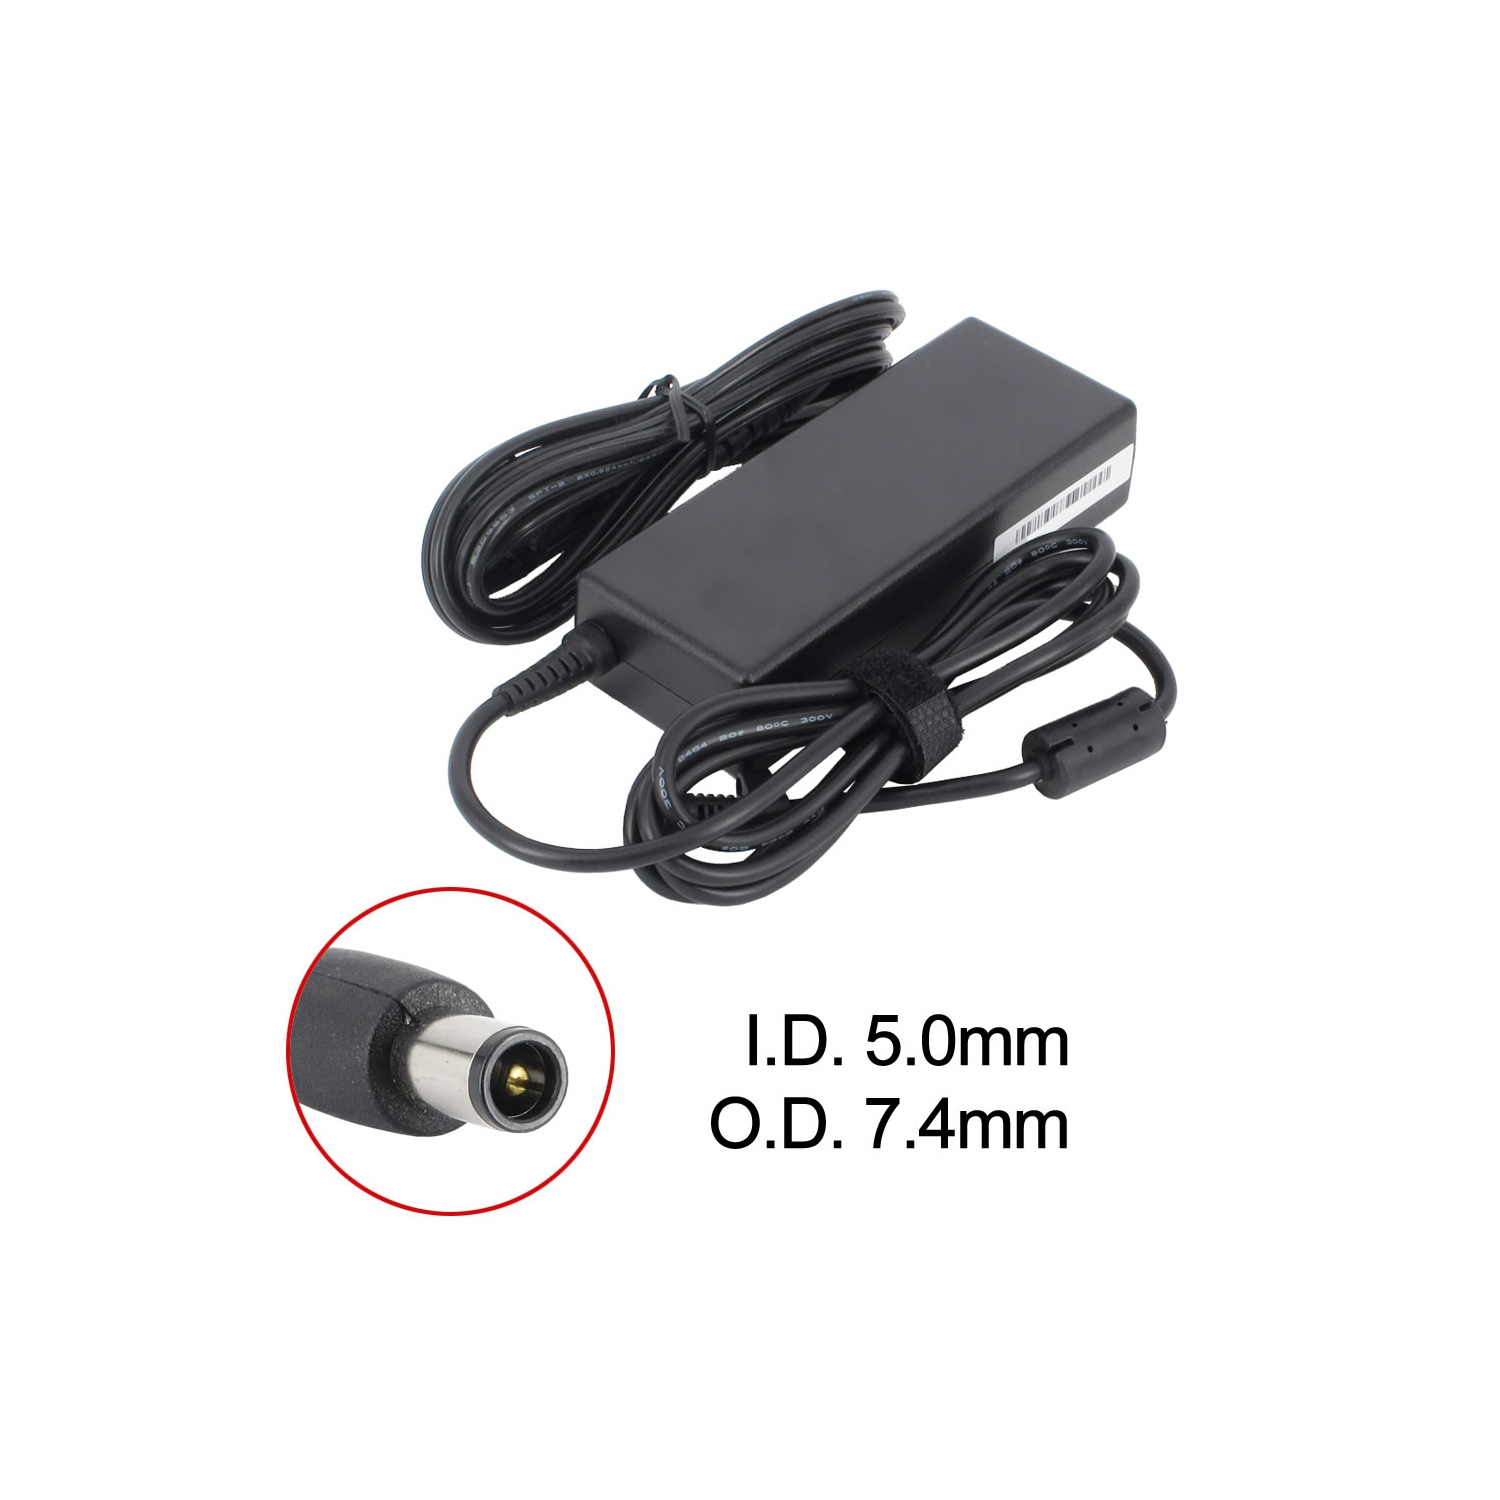 New Laptop AC Adapter for HP ProBook 450 G2, 412786-001, 463554-003, 609948-001, HP-AP091F13P SELF, PPP014L-SA